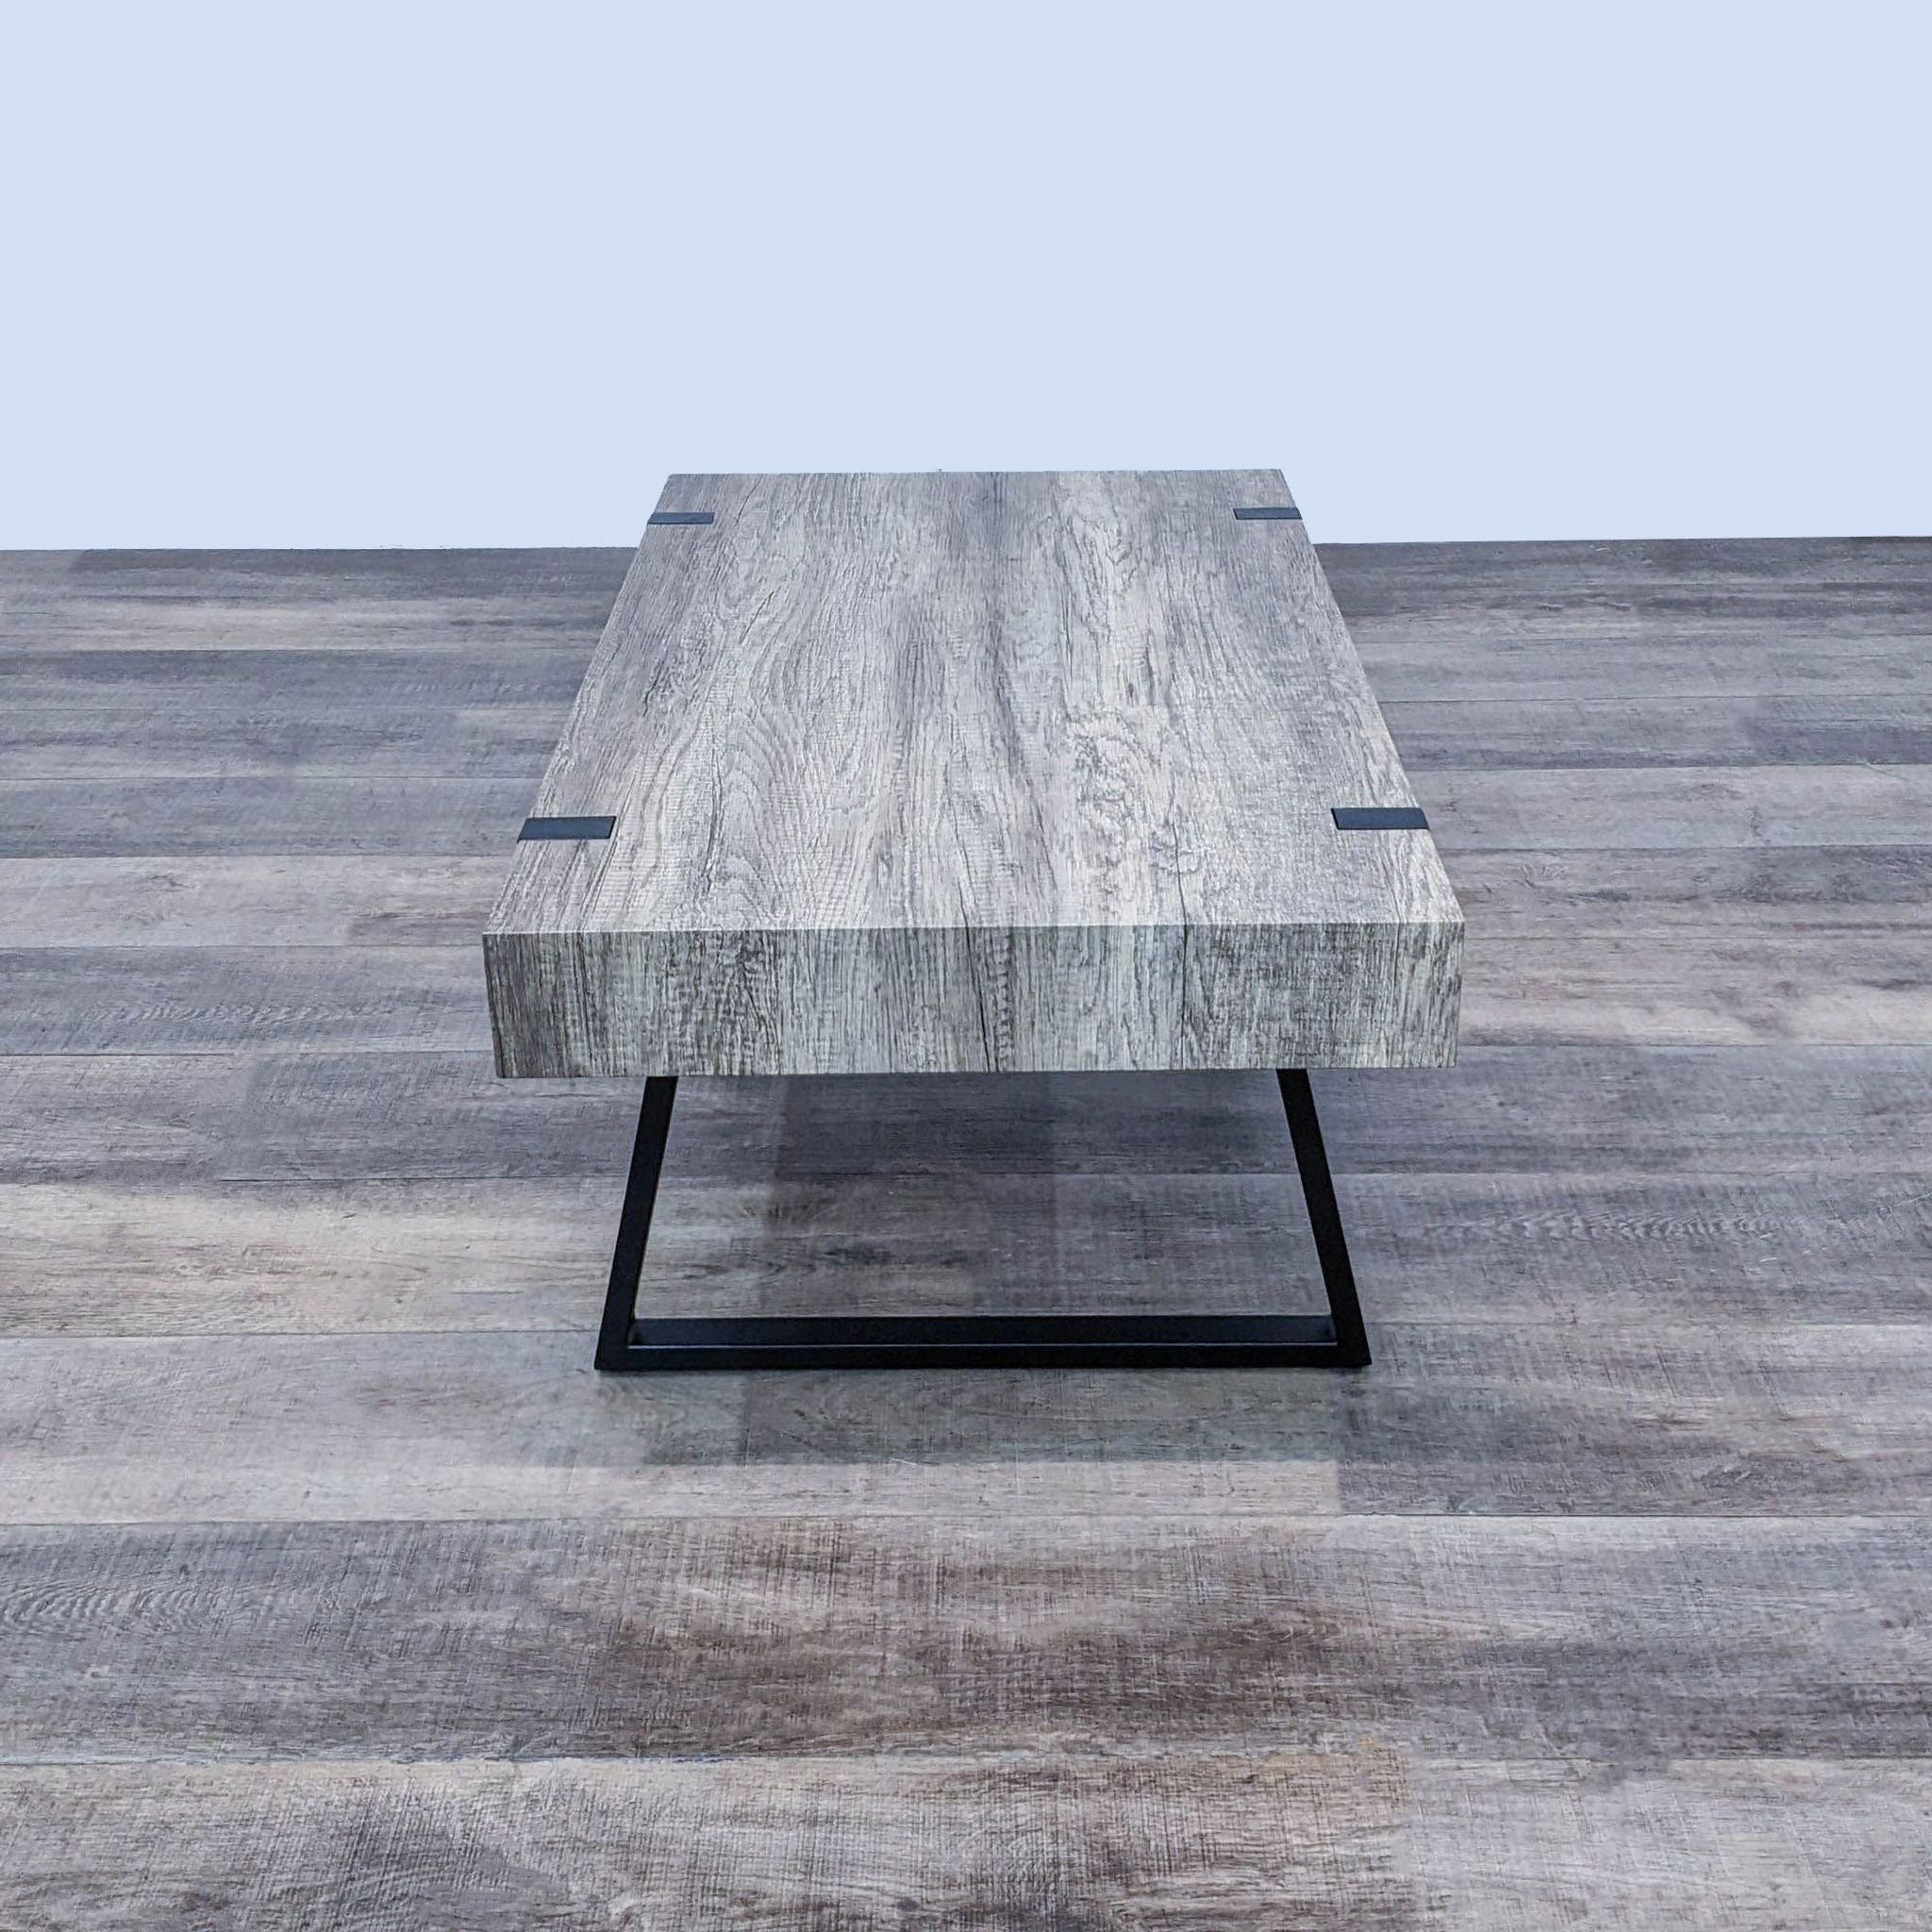 Modern rectangular Reperch coffee table showcasing wood texture and metallic frame, on a wooden floor.